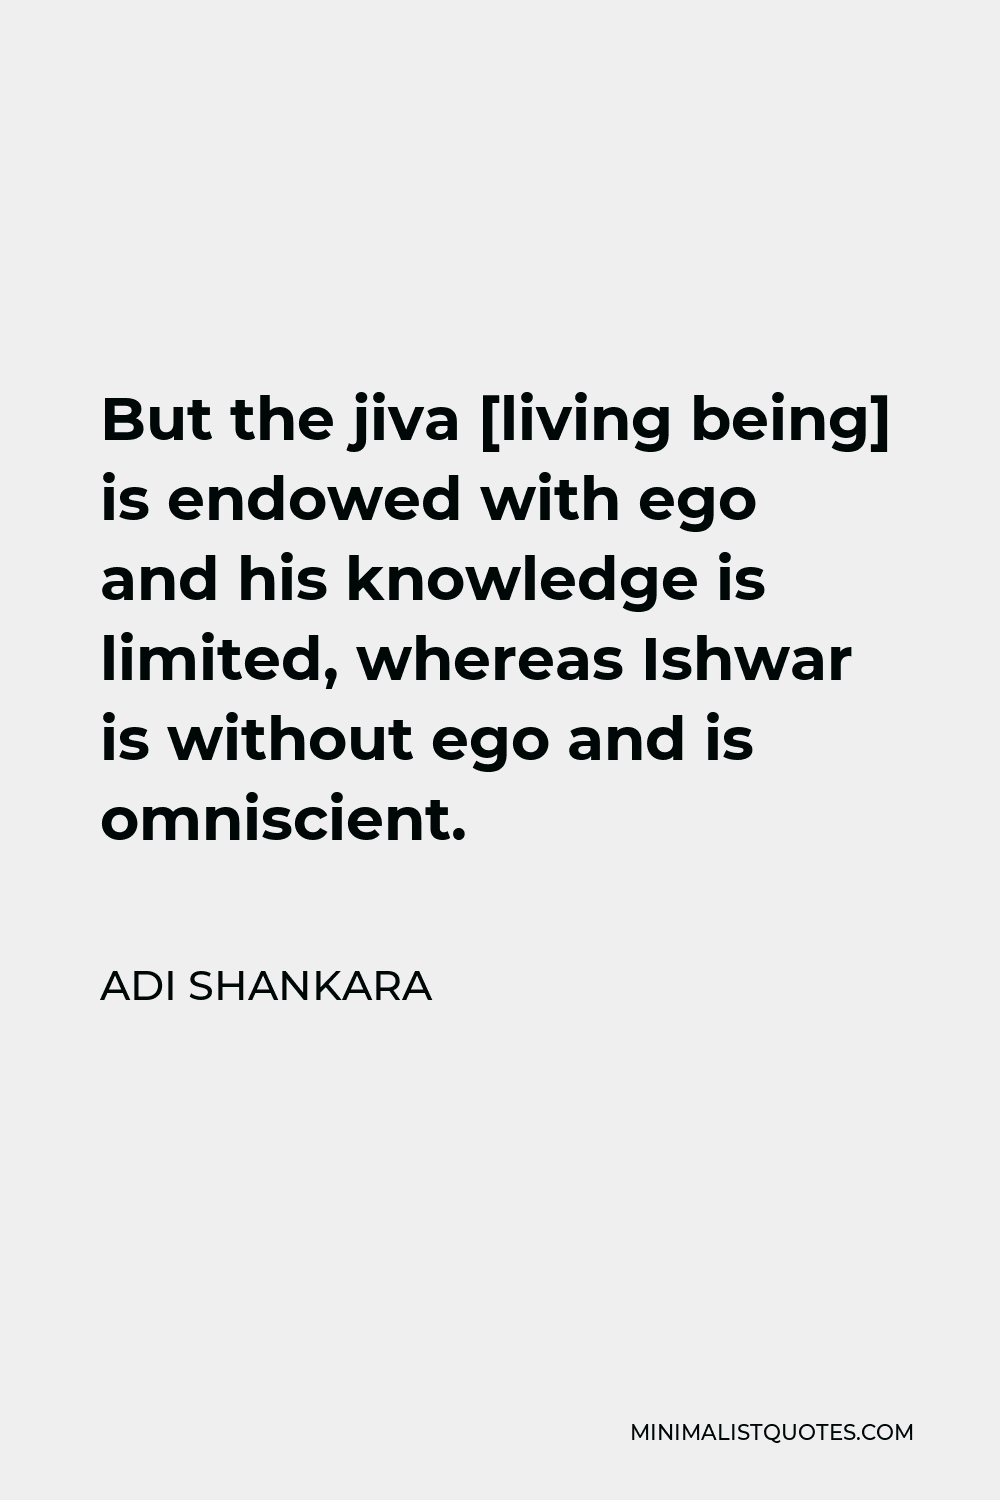 Adi Shankara Quote - But the jiva [living being] is endowed with ego and his knowledge is limited, whereas Ishwar is without ego and is omniscient.